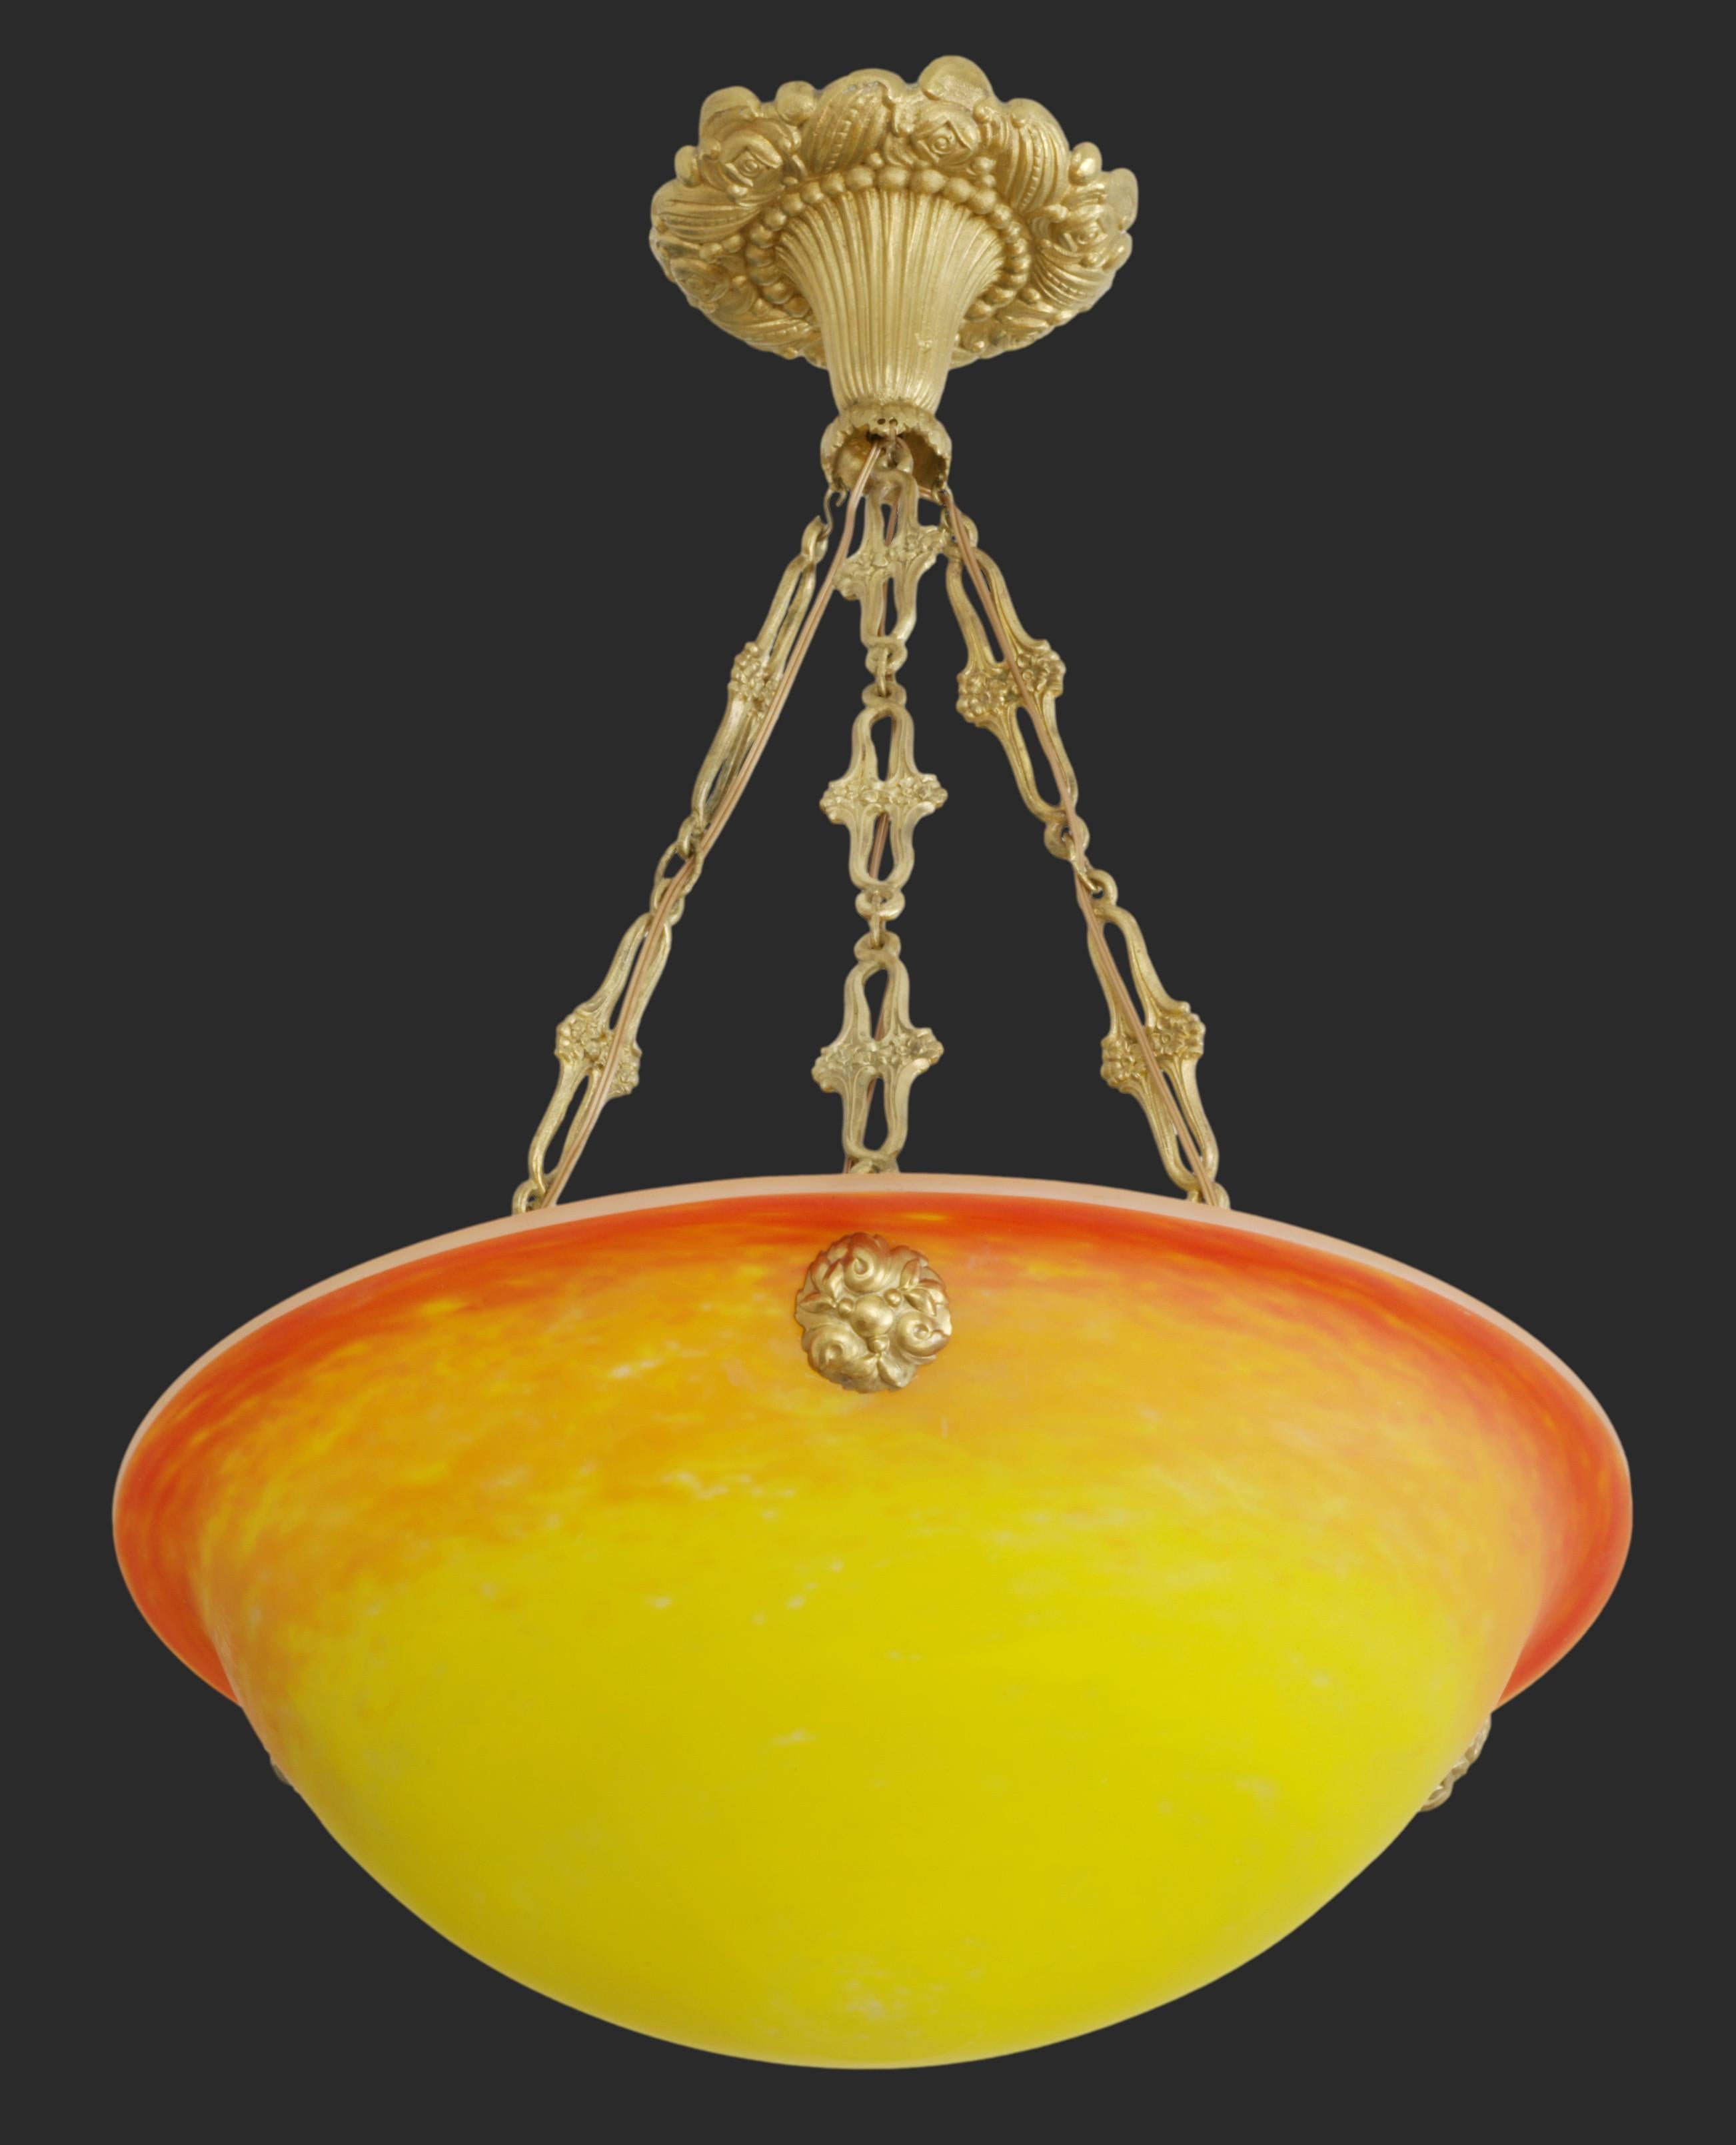 French Art Deco pendant chandelier by Muller Frères (Luneville near Nancy), France, 1920s. Mottled blown double glass shade. Rare colors: yellow and orange. Sunrise pattern. Gorgeous and genuine solid bronze fixture. Signed 